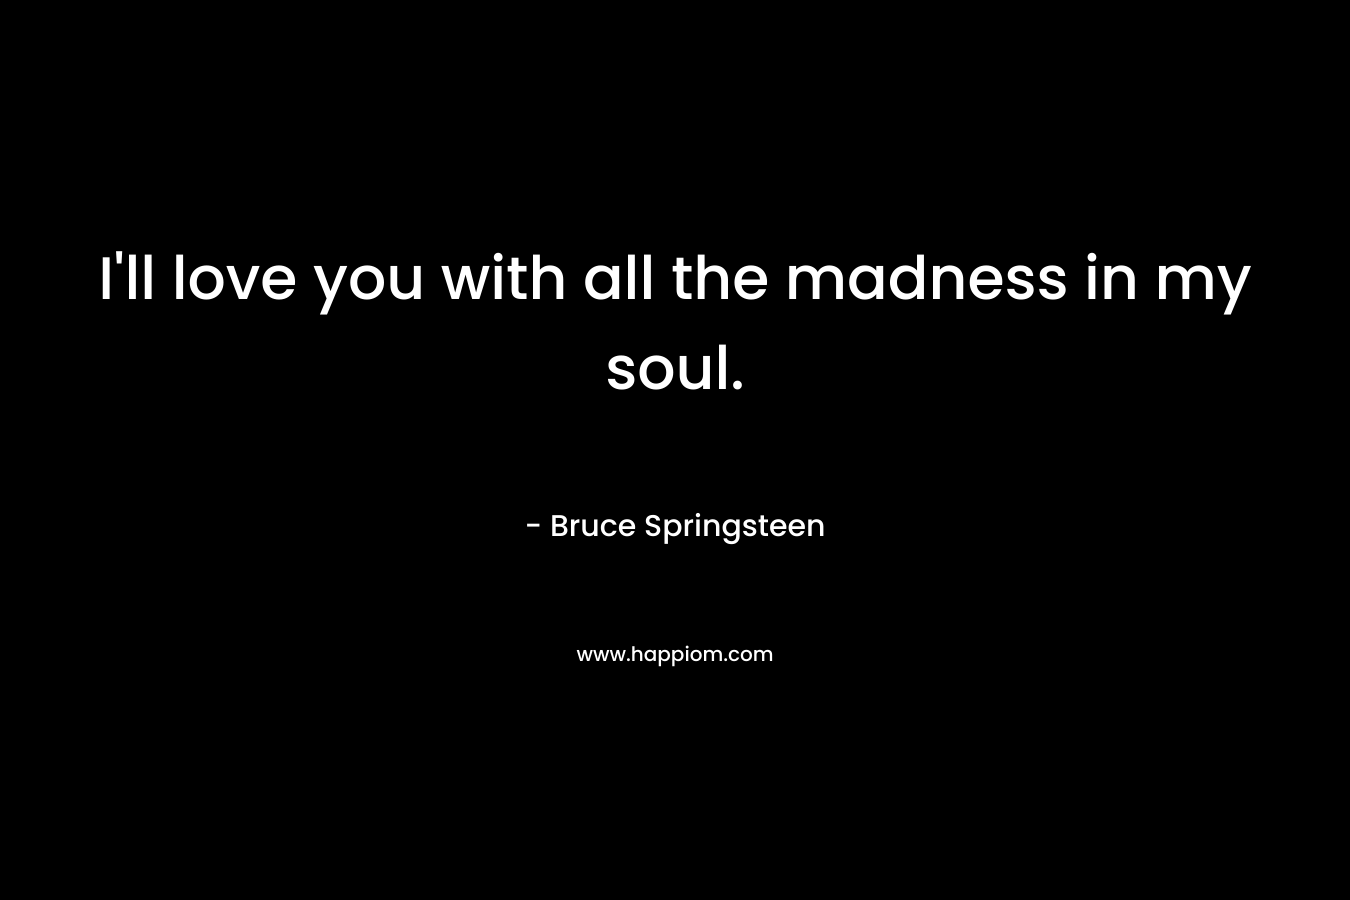 I'll love you with all the madness in my soul.